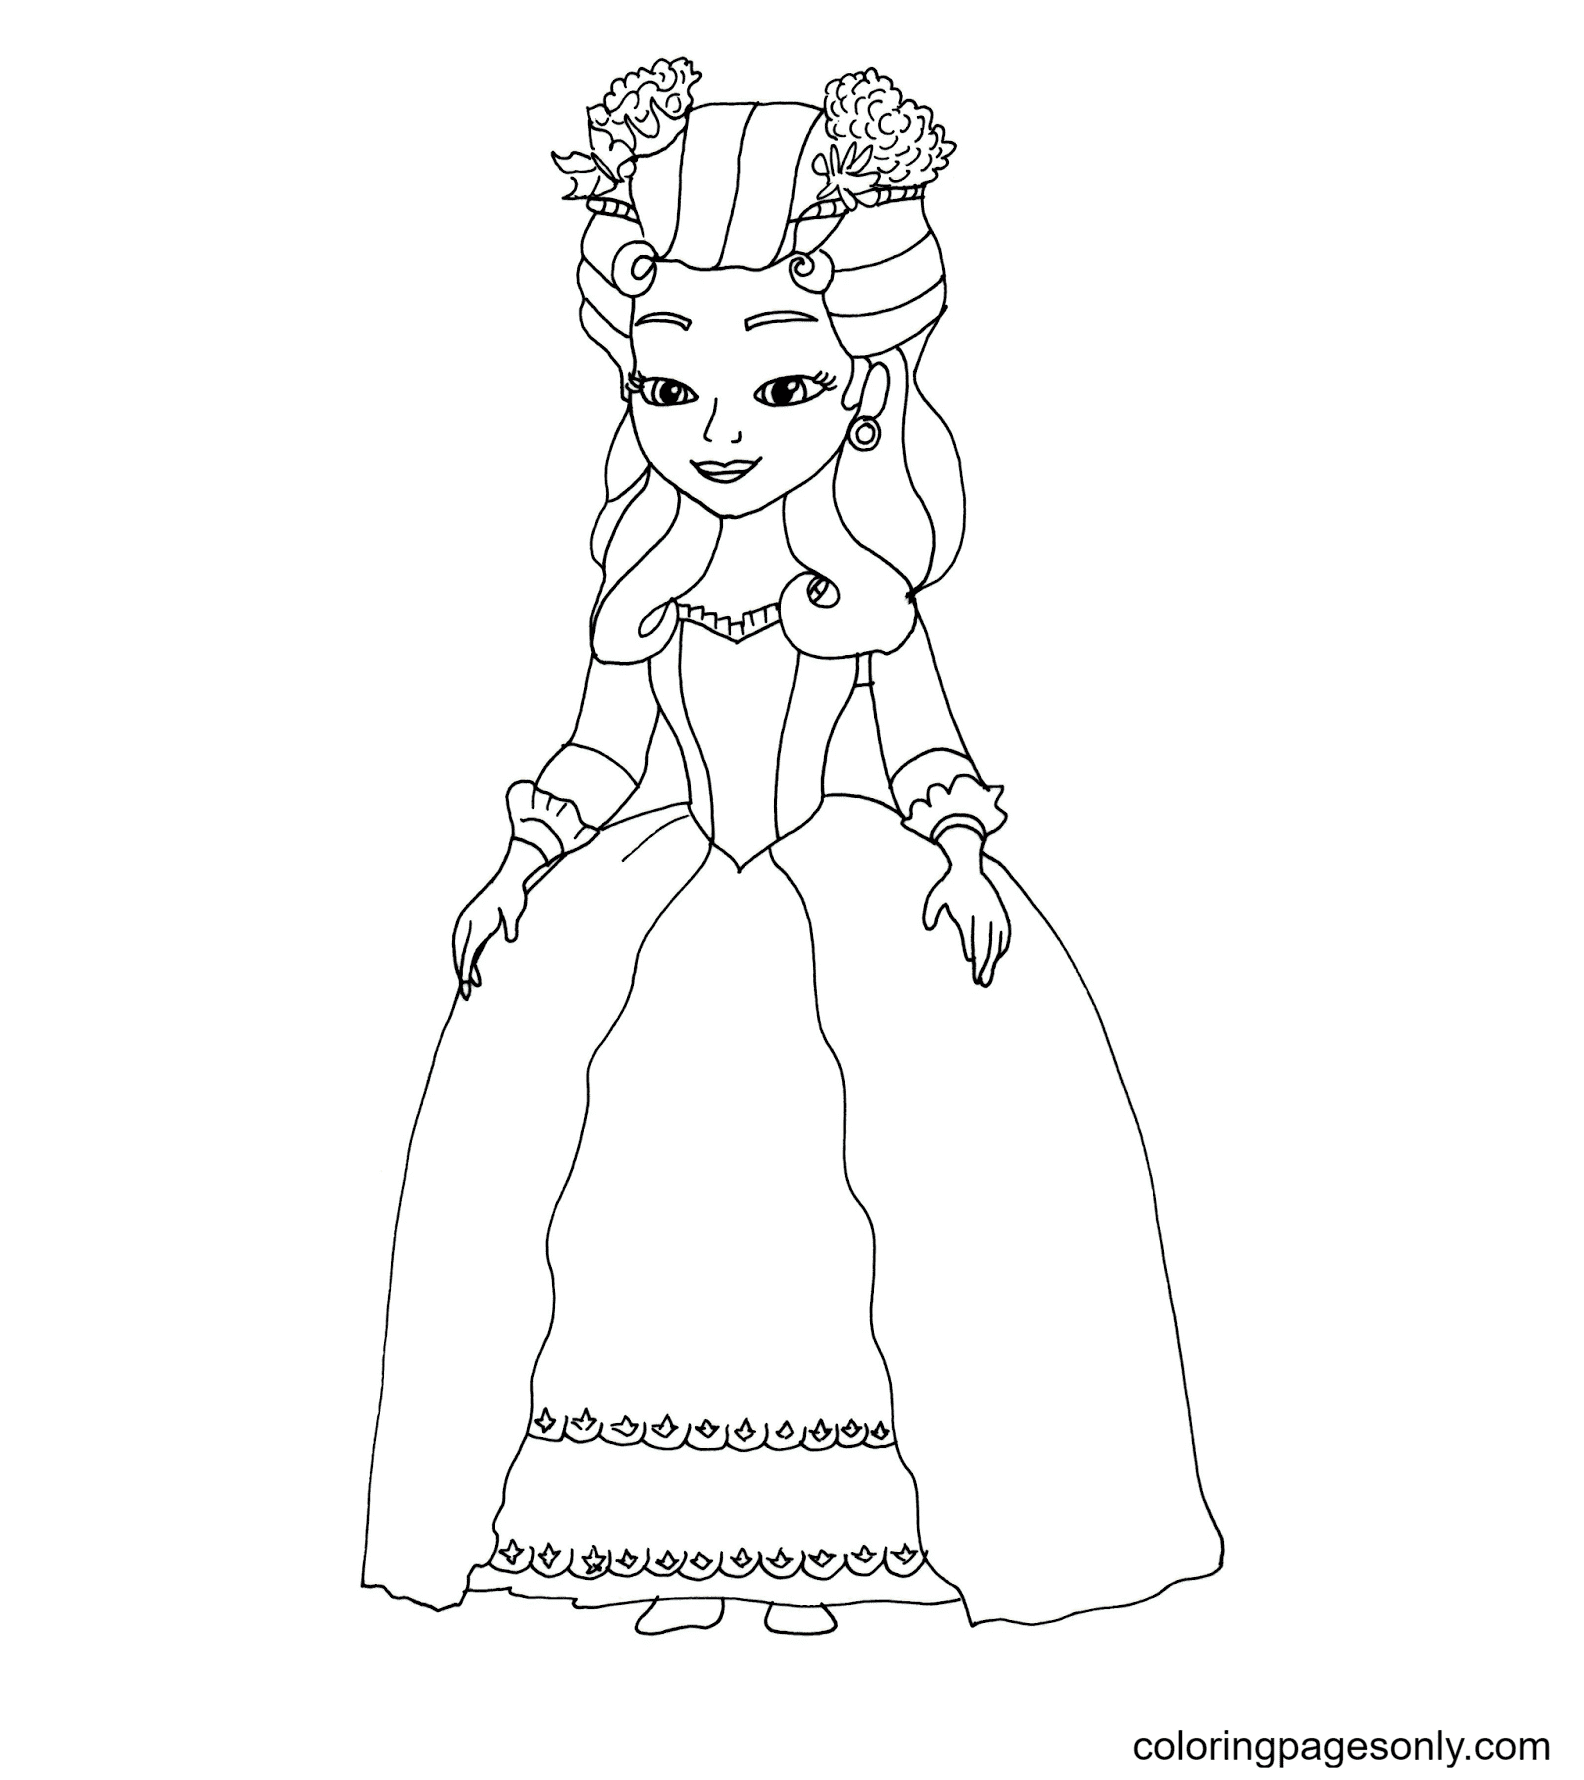 Princess Hildegard from Sofia the First Coloring Pages